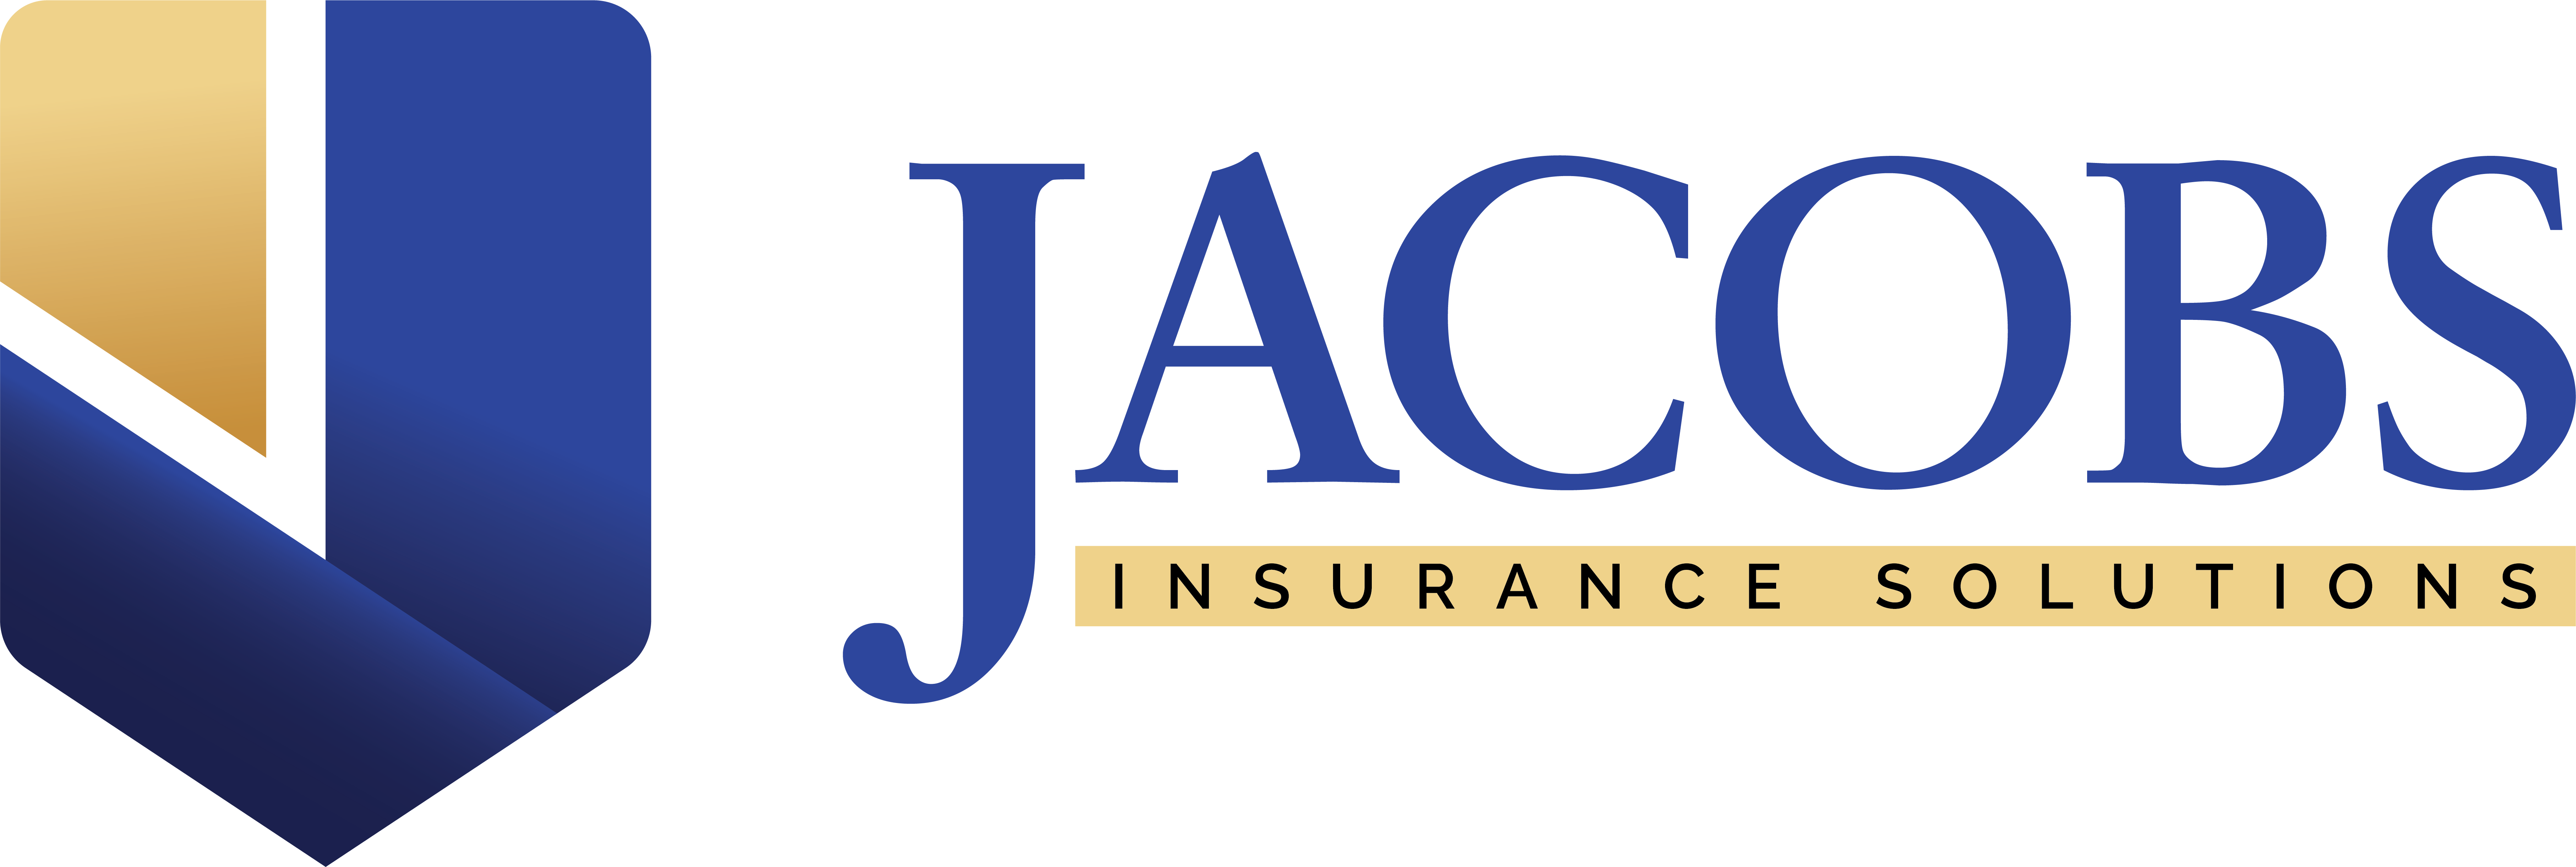 Jacobs Insurance Solutions